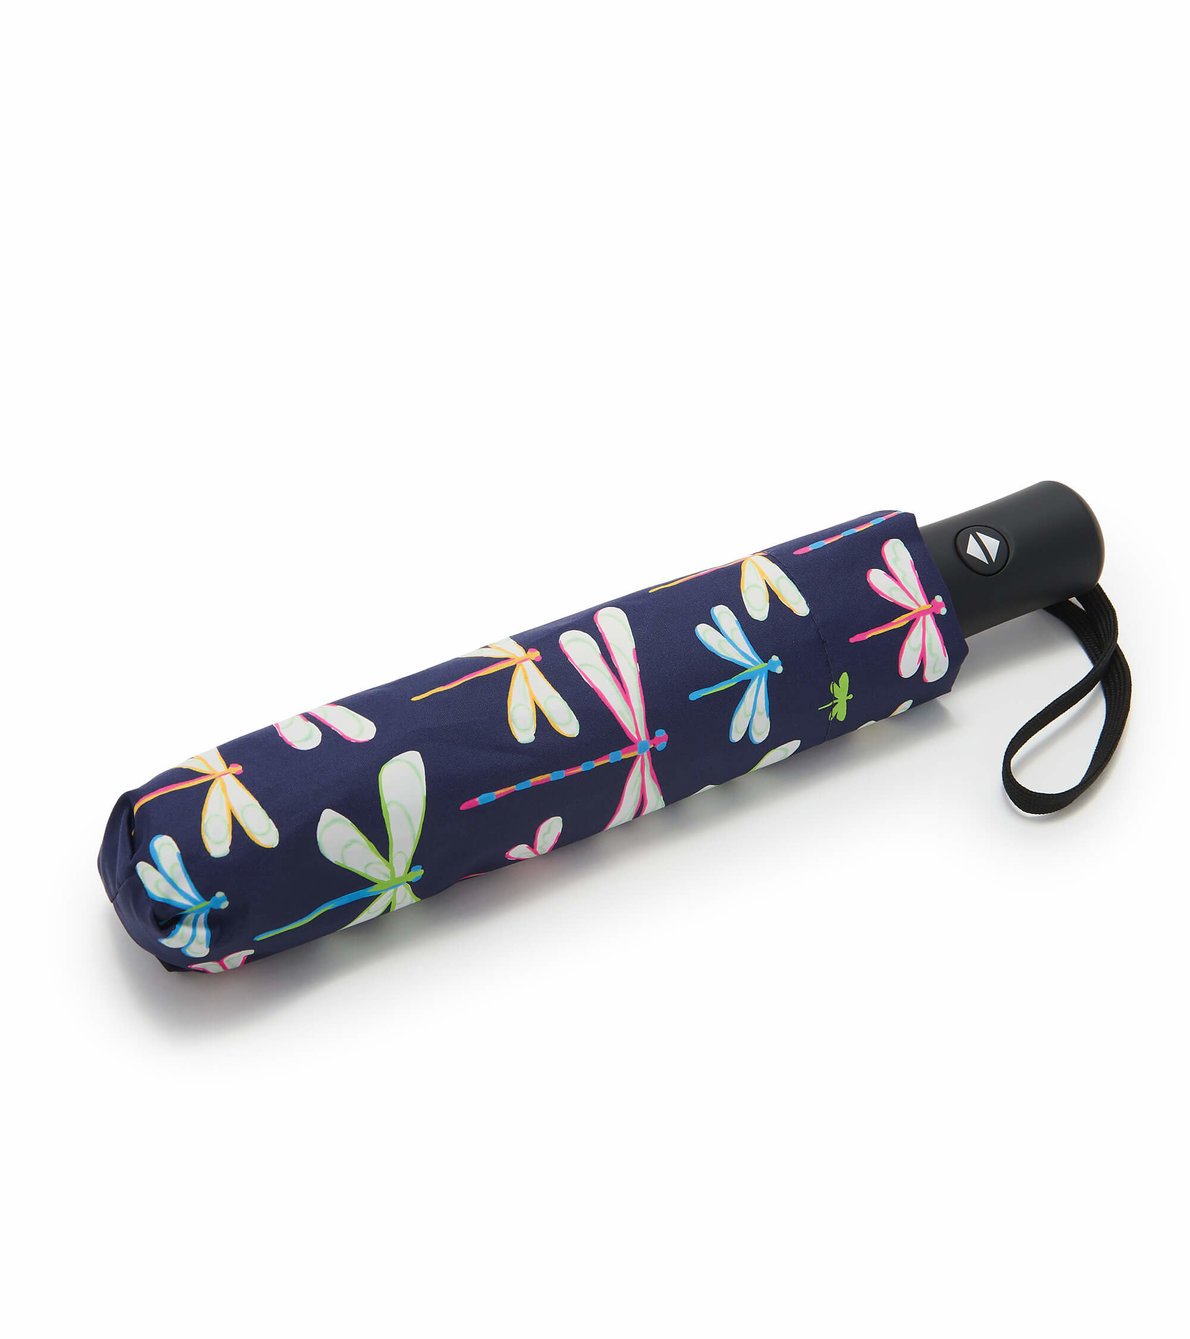 View larger image of Dragonflies Adult Colour Changing Folding Umbrella